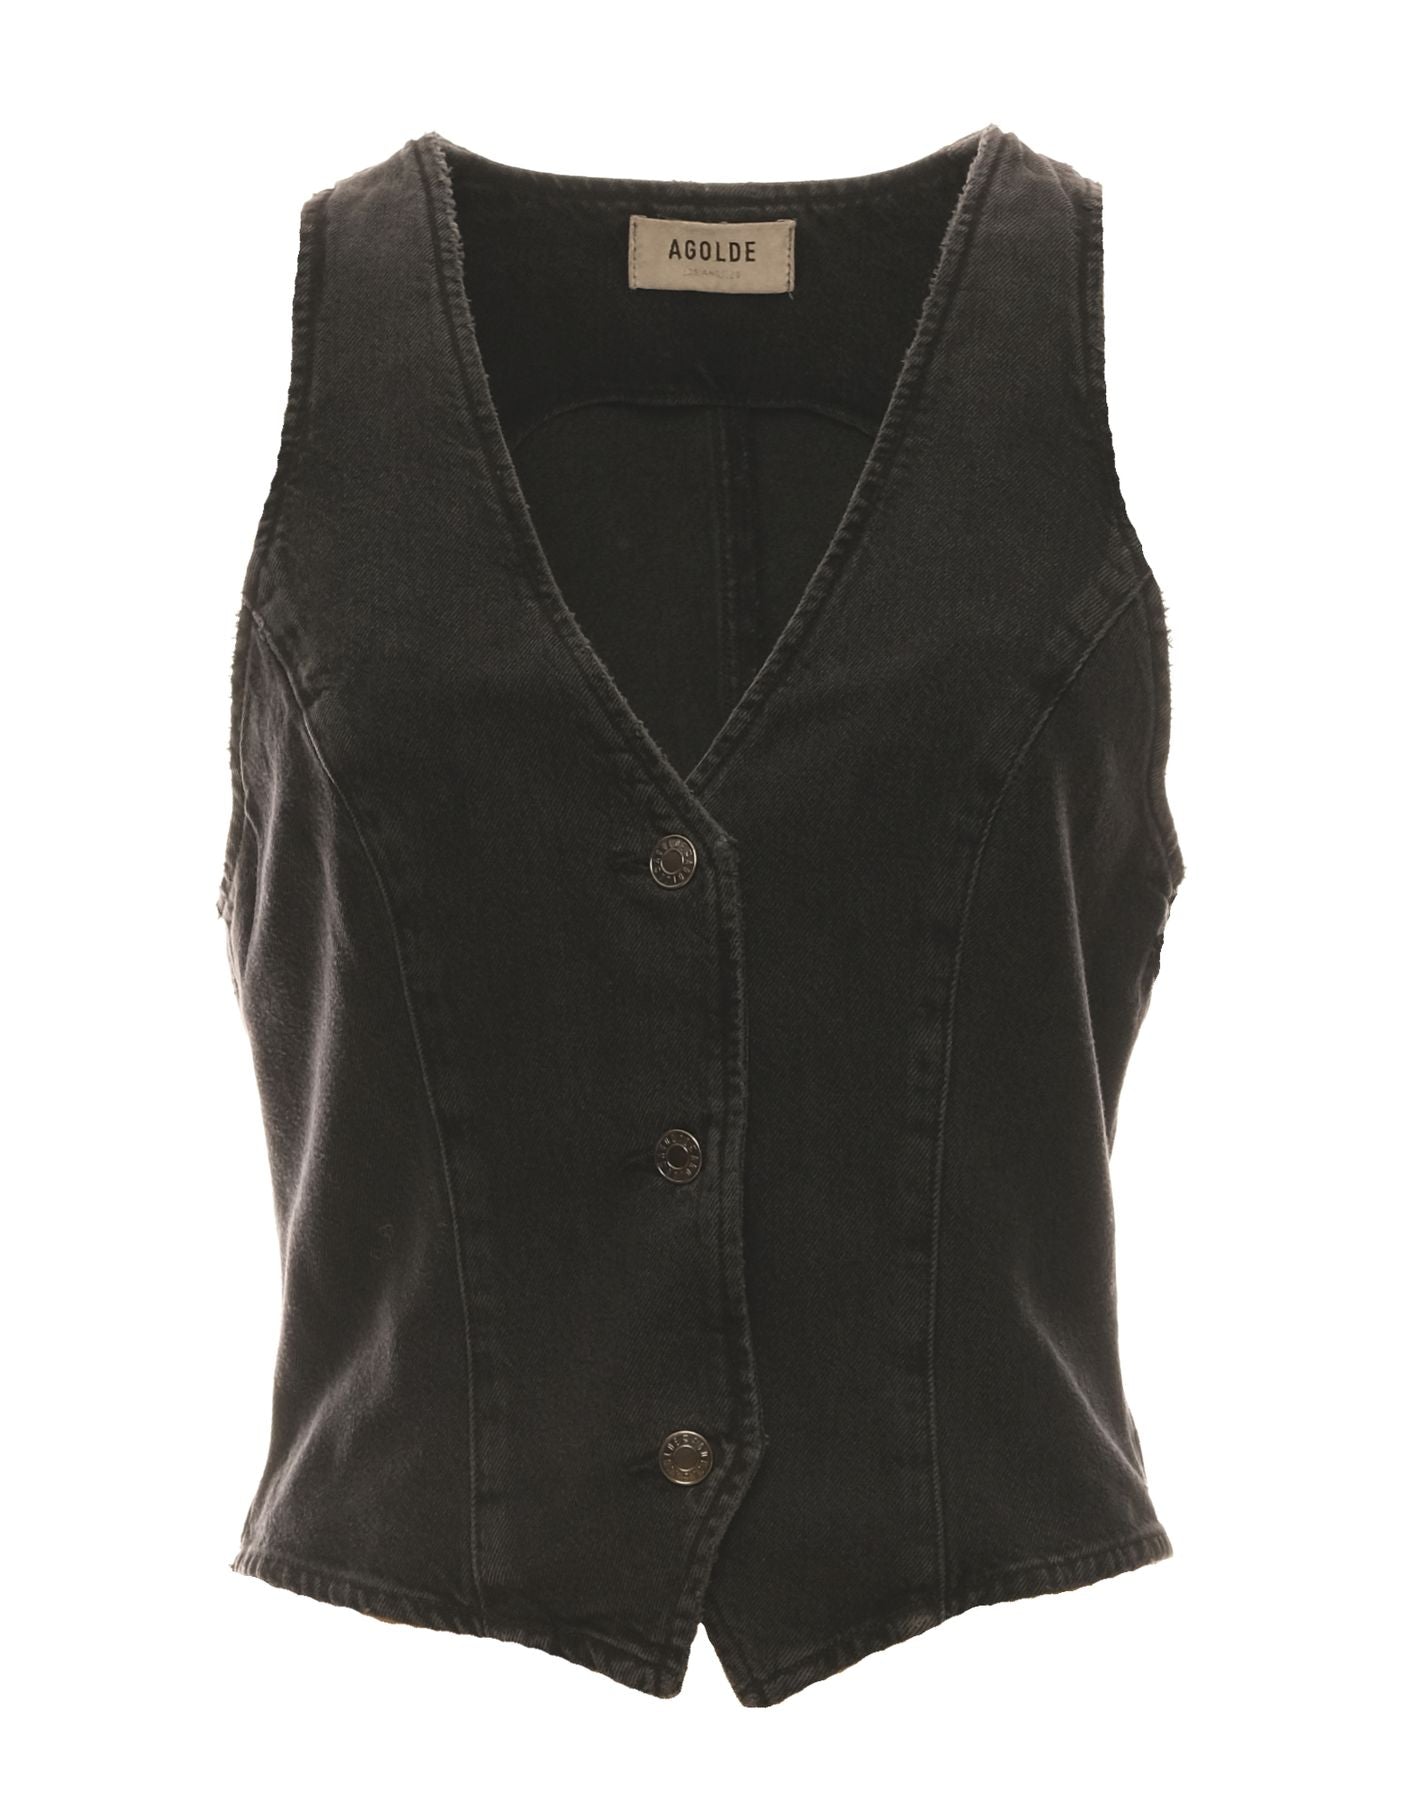 Gilet woman A5027 1557 Spider Agolde